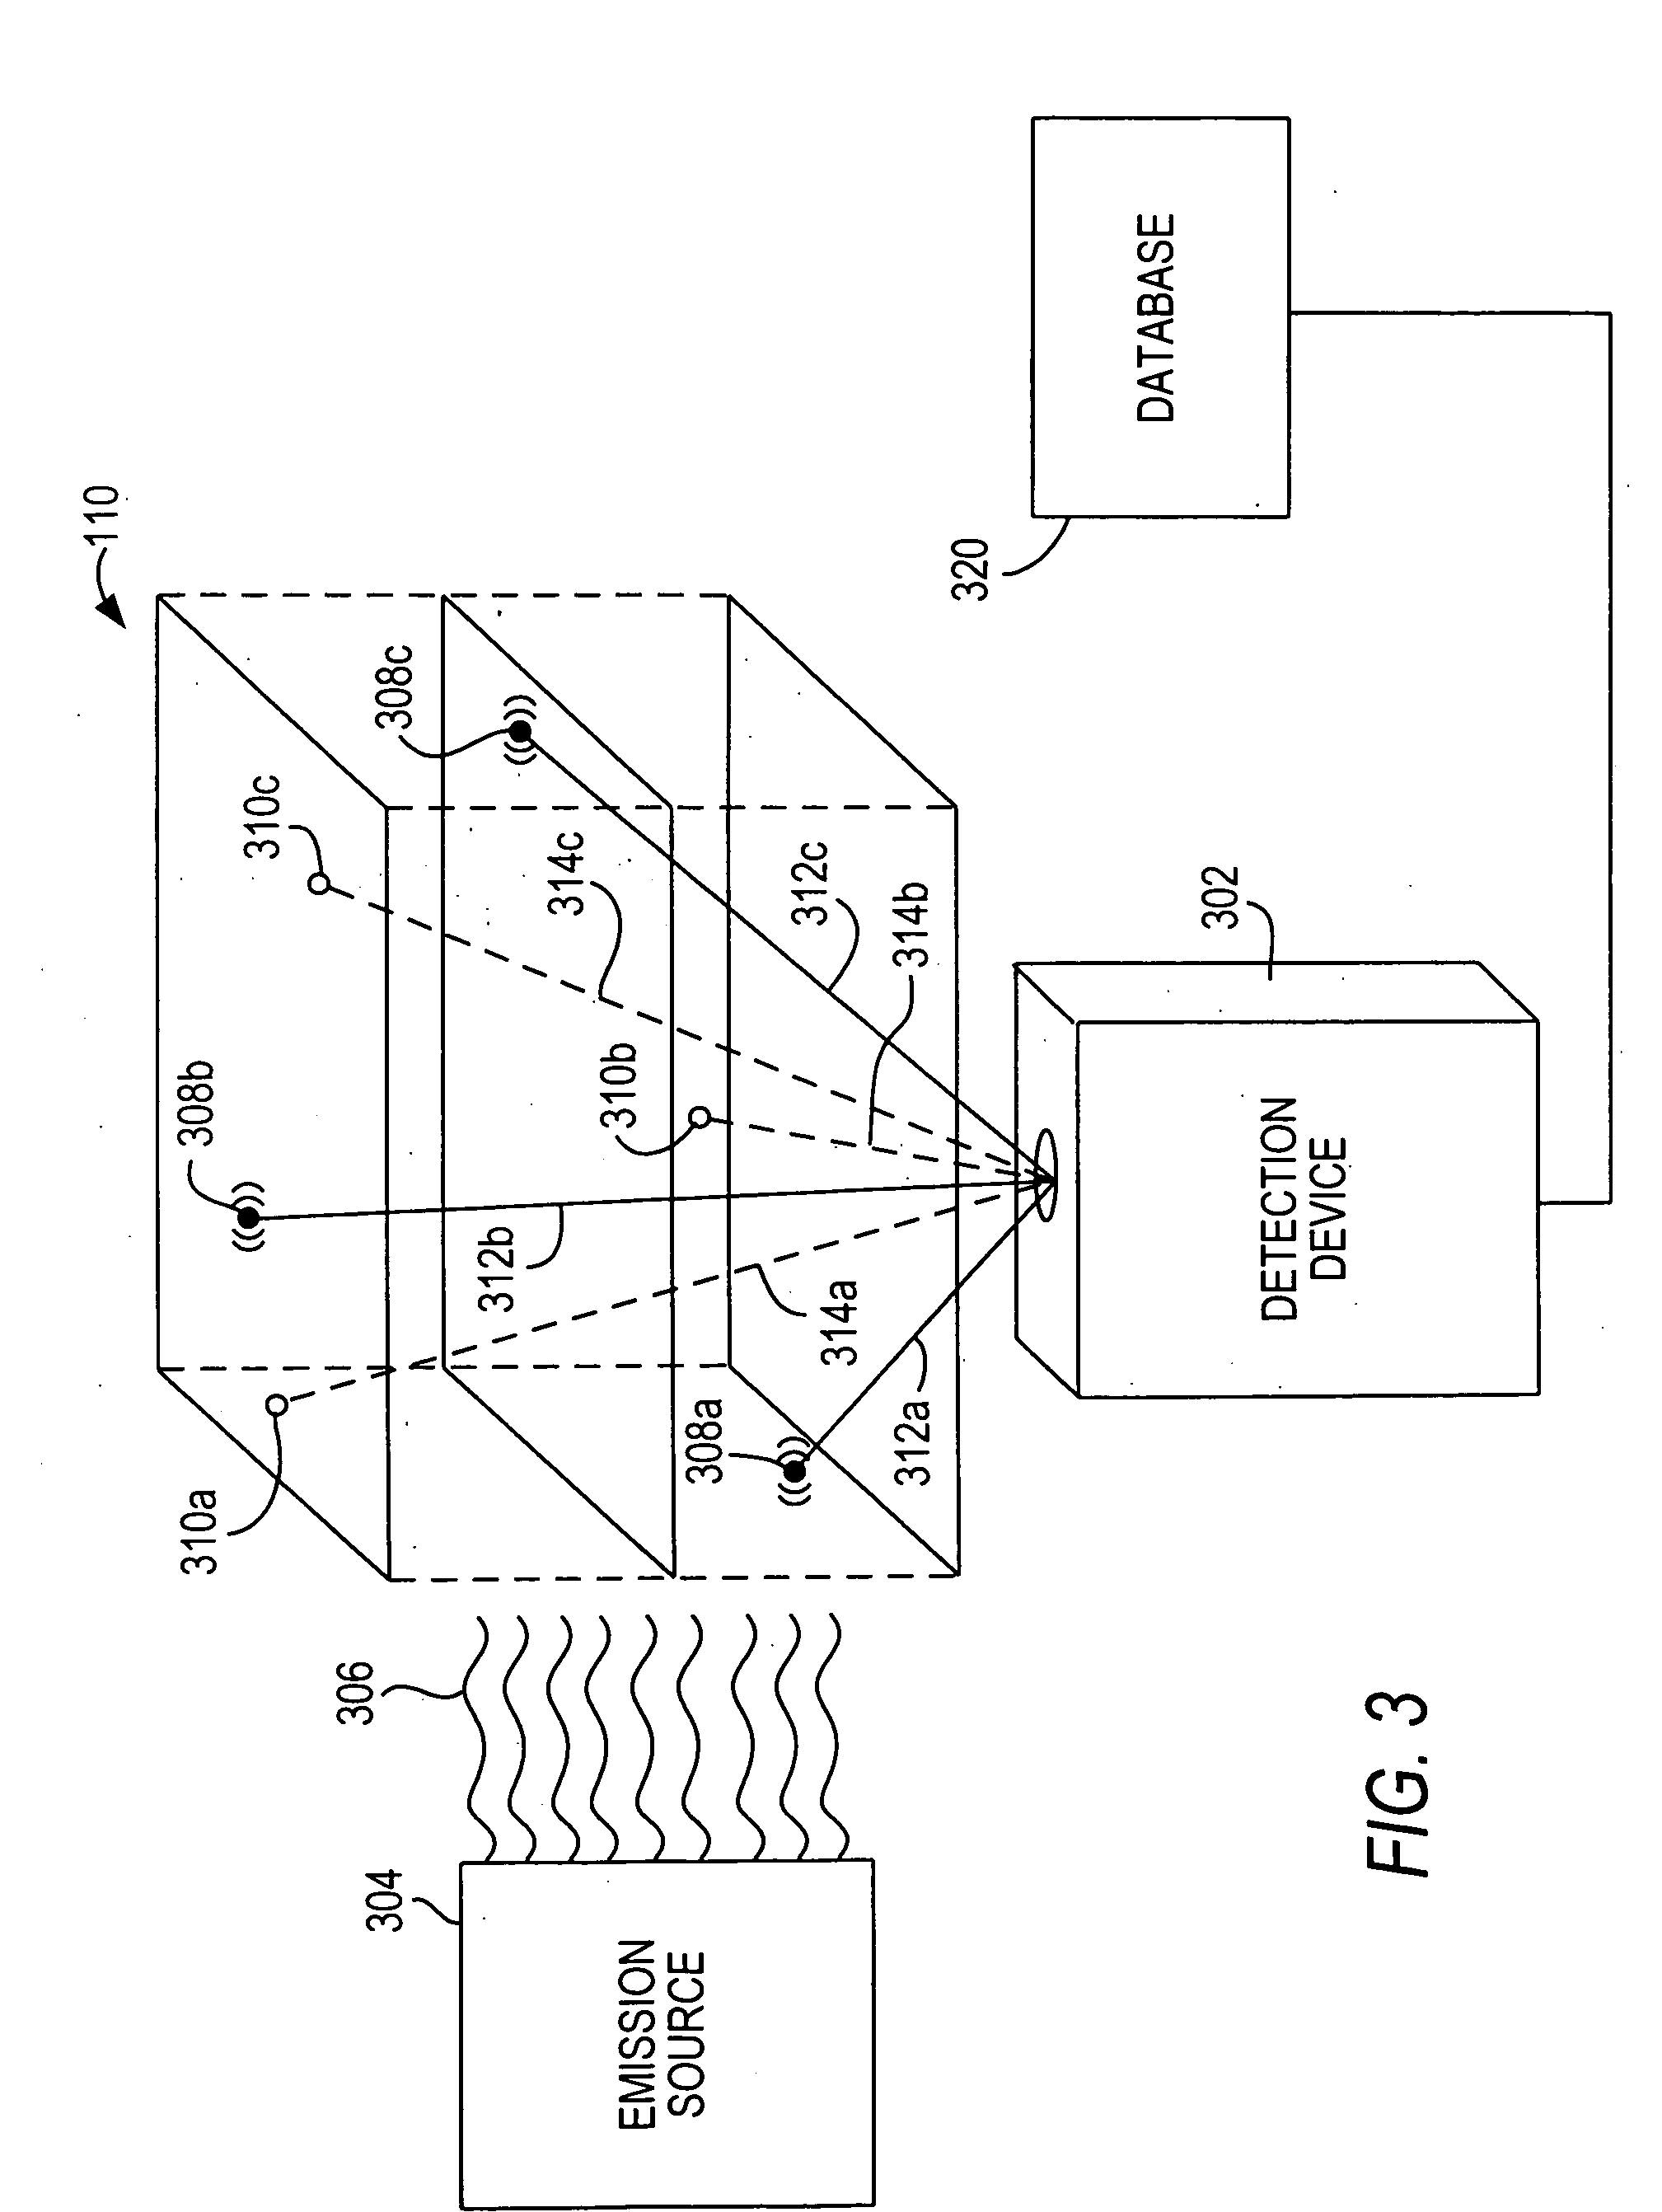 Systems and methods for detecting and verifying taggant information of a tagged item or substance